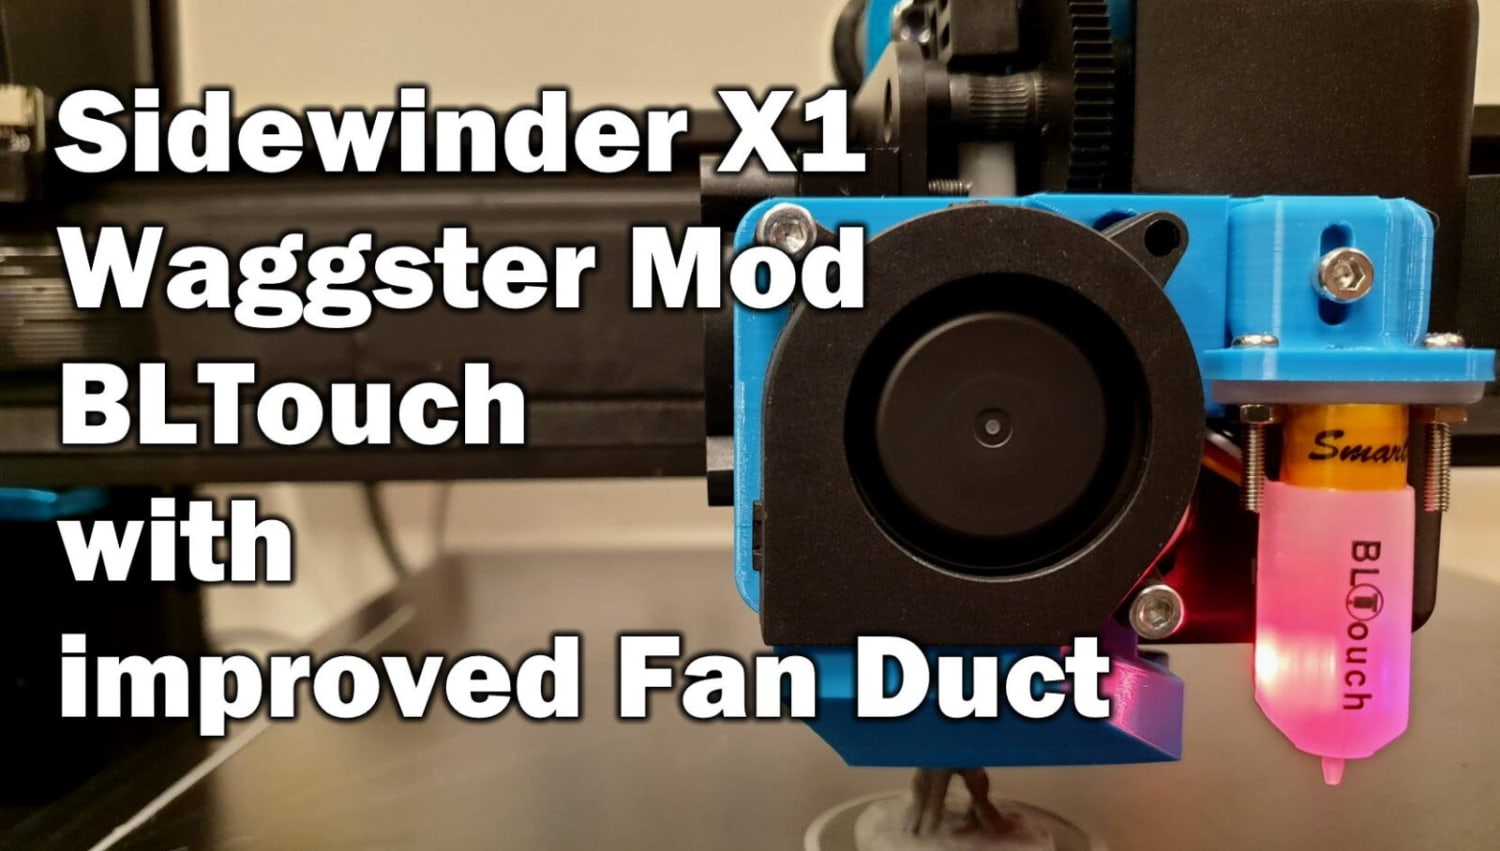 Sidewinder X1 Waggster Mod BLTouch Improved Fan Duct